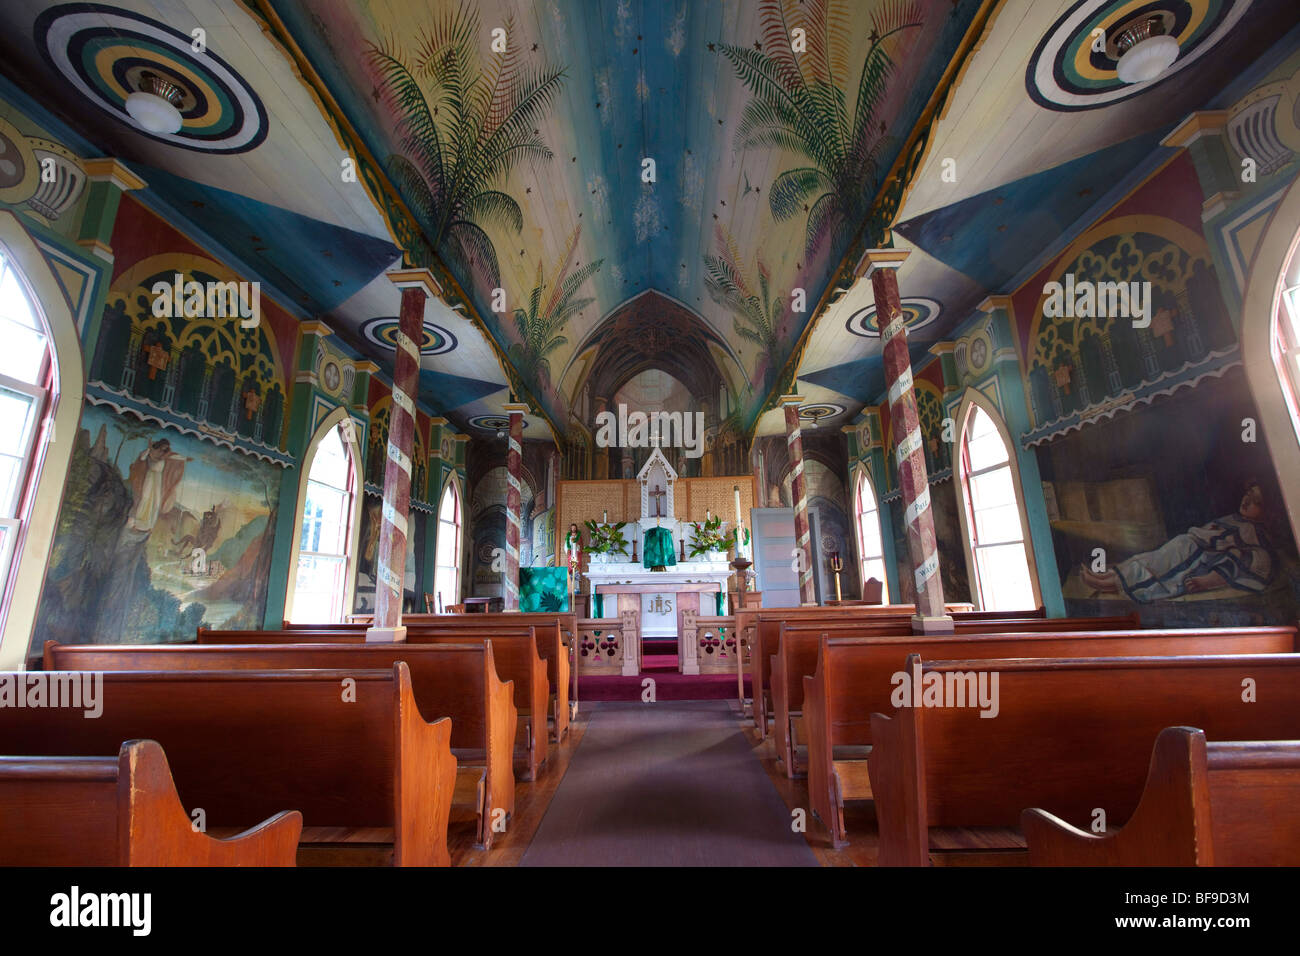 St. Benedicts Painted Church, 1899, Captain Cook, Island of Hawaii Stock Photo